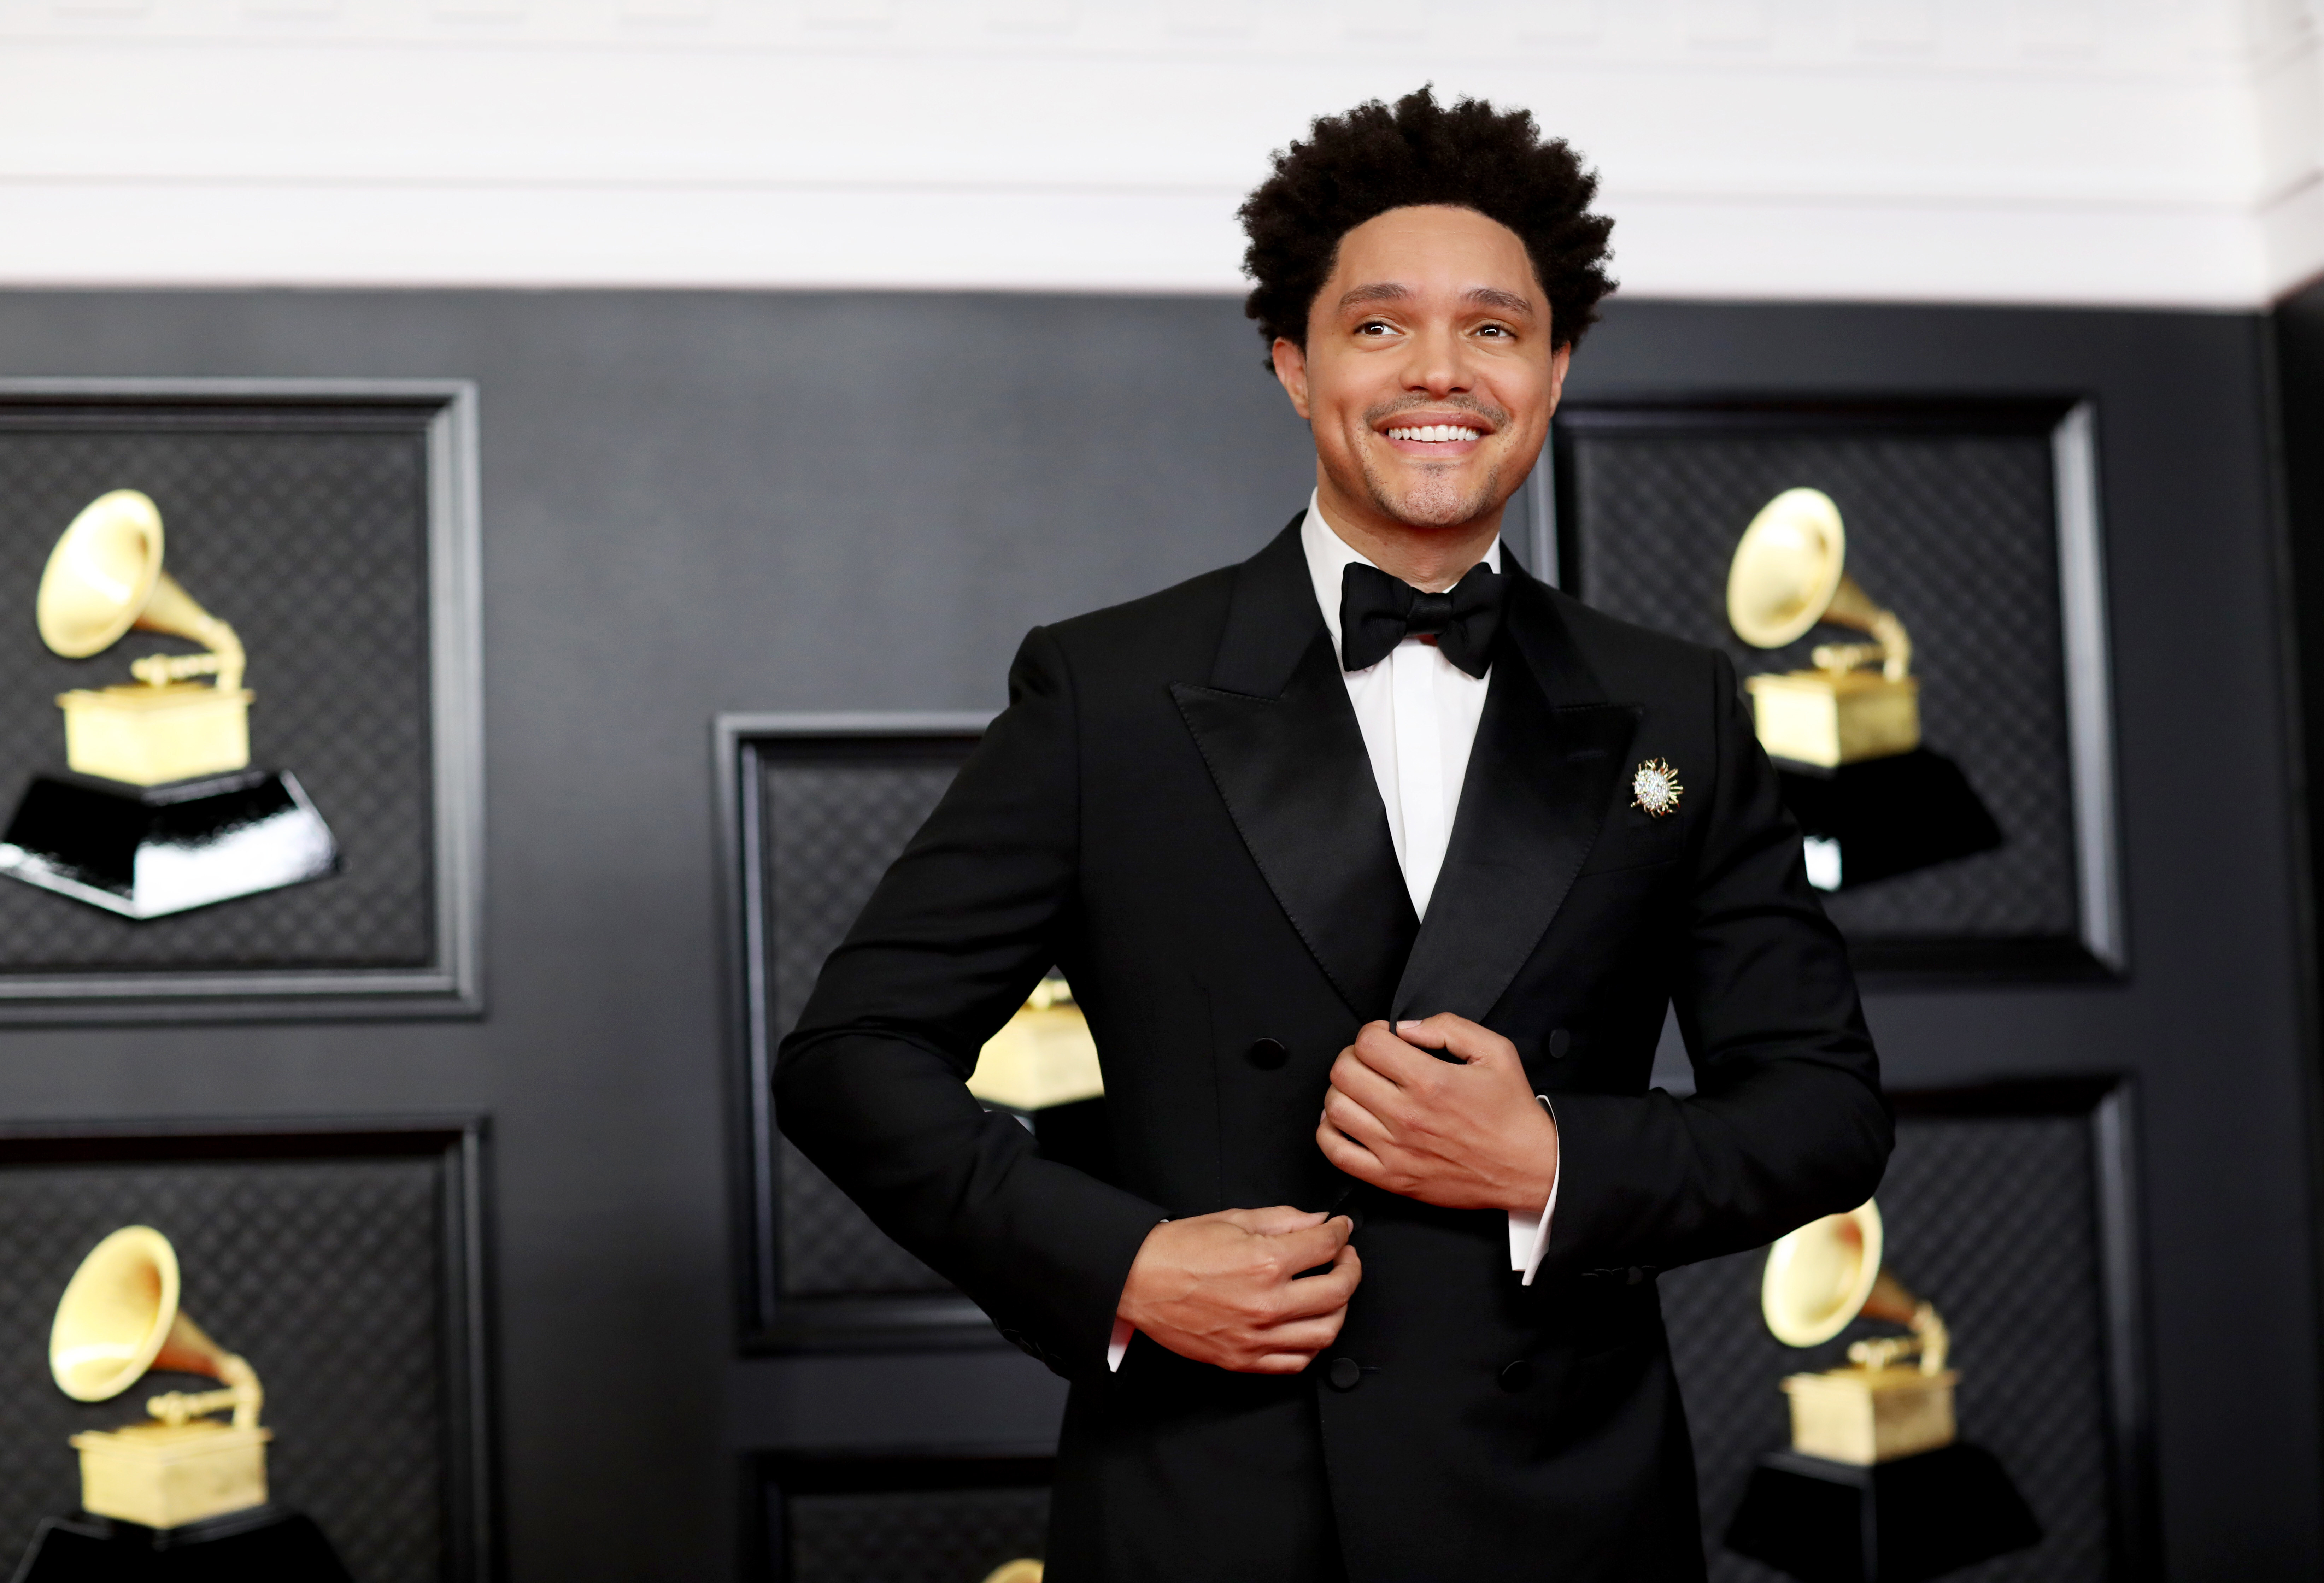 Host Trevor Noah on the red carpet at the 63rd Annual Grammy Awards on March 14, 2021. Photo: Los Angeles Times/TNS